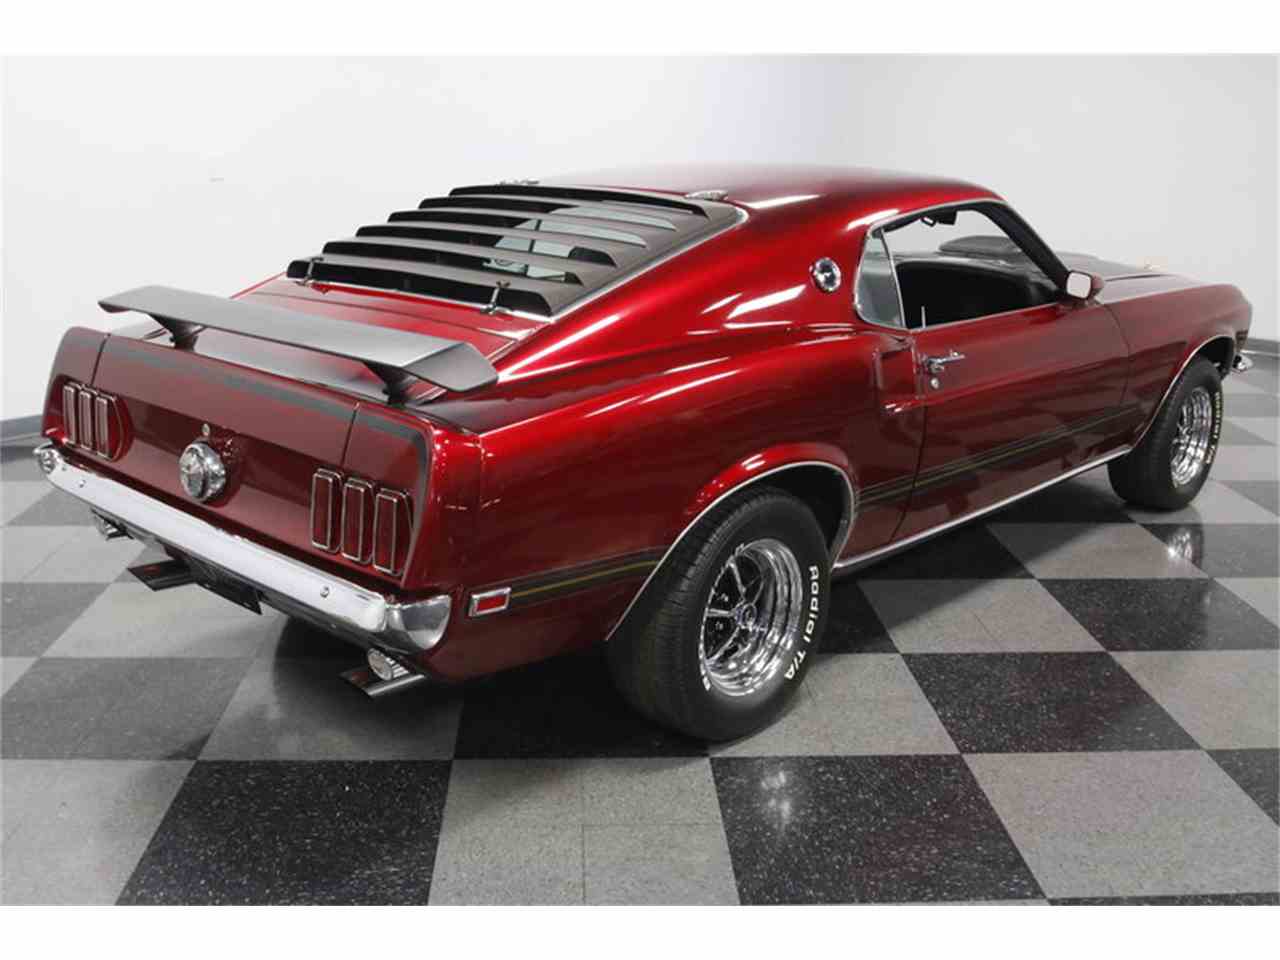 1969 Ford Mustang Mach 1 for Sale | ClassicCars.com | CC-1076546